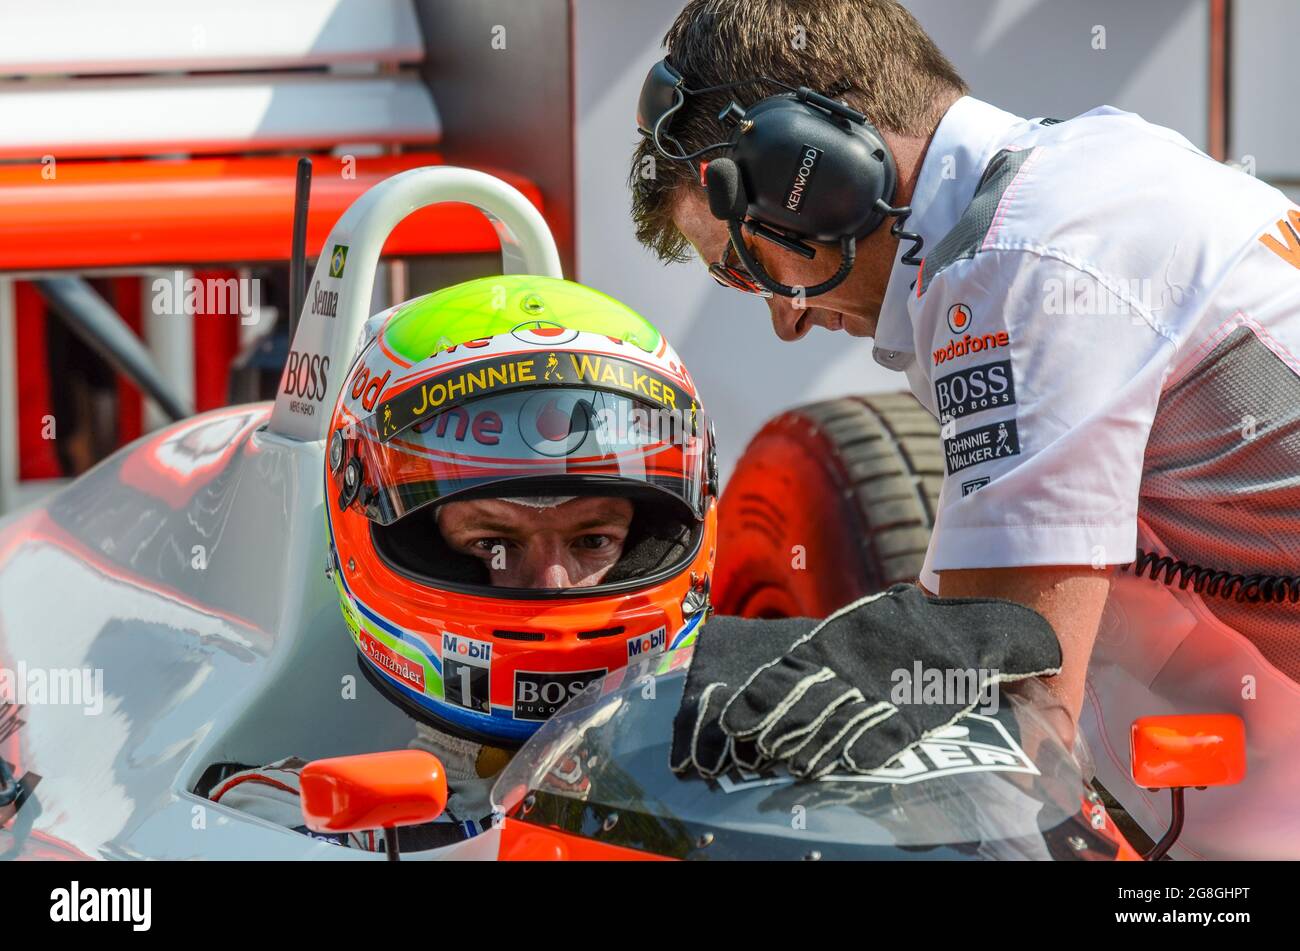 Oliver Turvey, racing driver, preparing to race Ayrton Senna's historic McLaren MP4/4 at the Goodwood Festival of Speed event. With team crew member Stock Photo